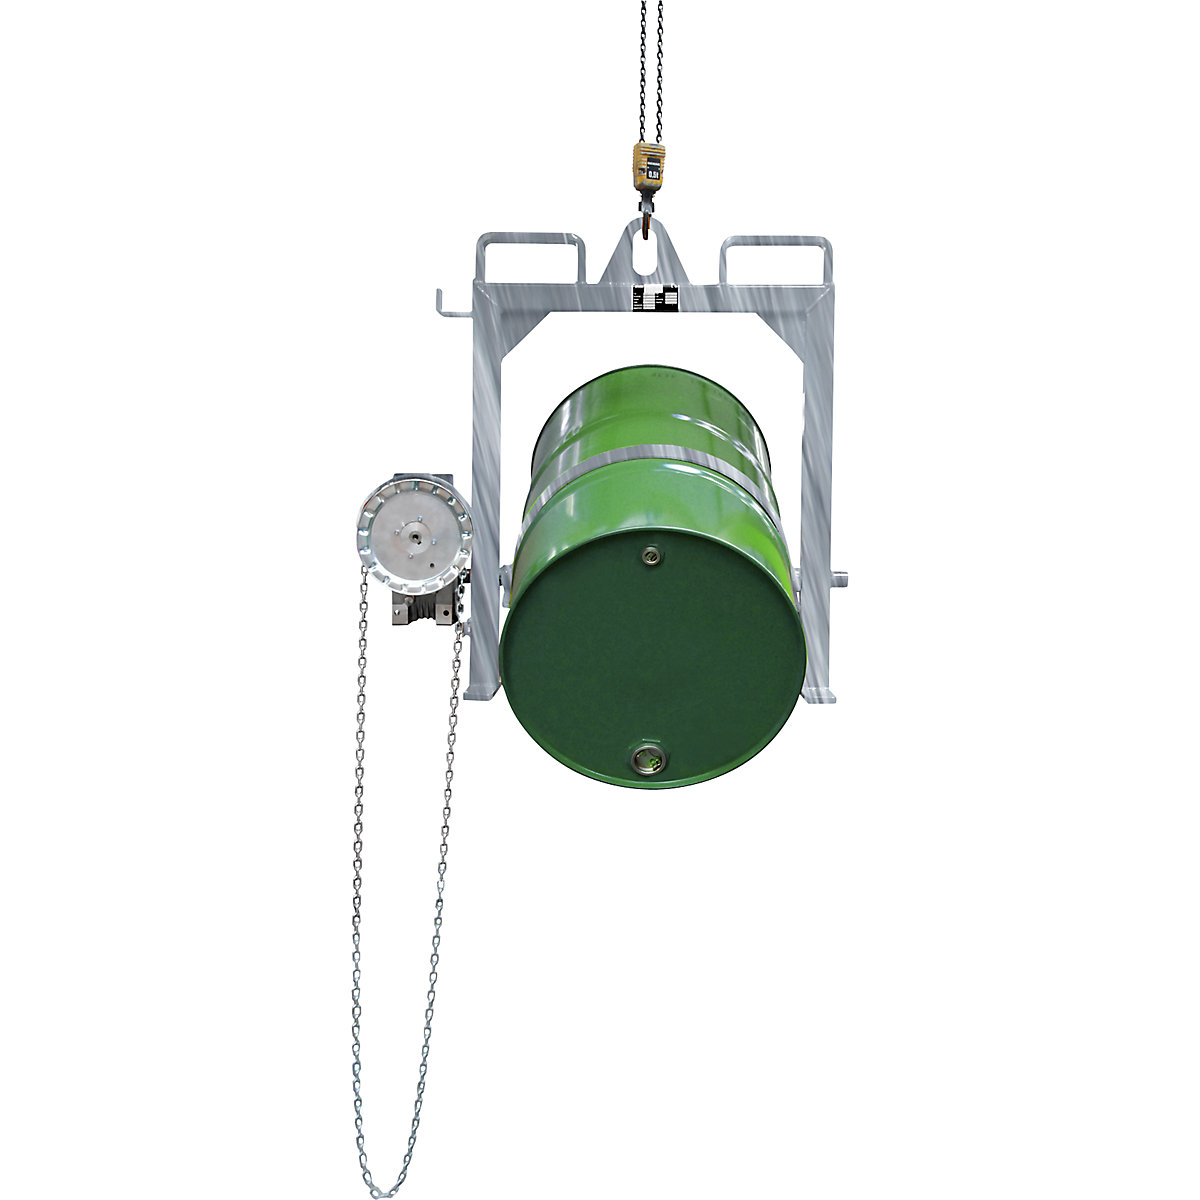 Drum tilting unit – eurokraft pro, with chain loop and for use with a crane, zinc plated